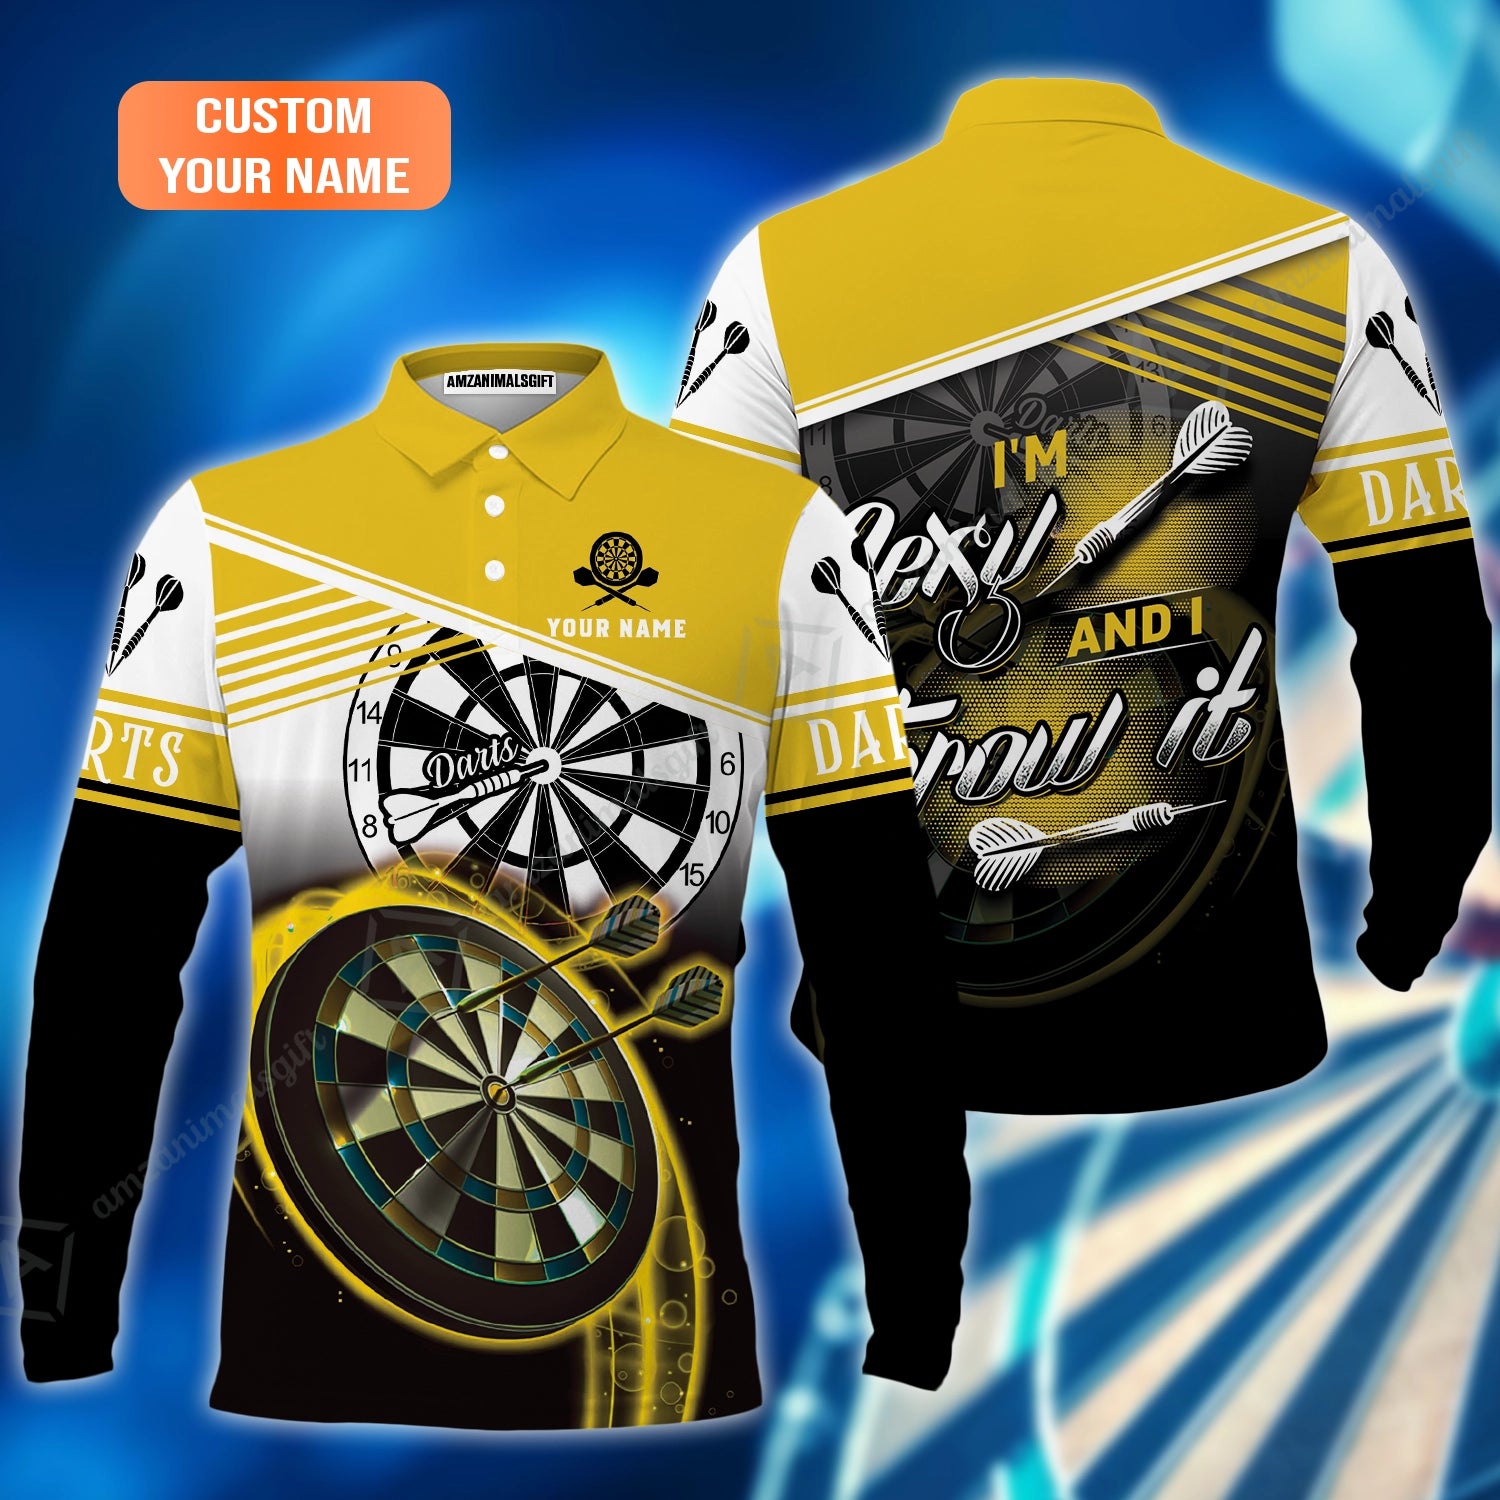 Personalized Darts Long Polo Shirt, Darts Yellow Color Custom Polo Shirt I'm Sexy And I Throw It, Outfits For Darts Players, Darts Team